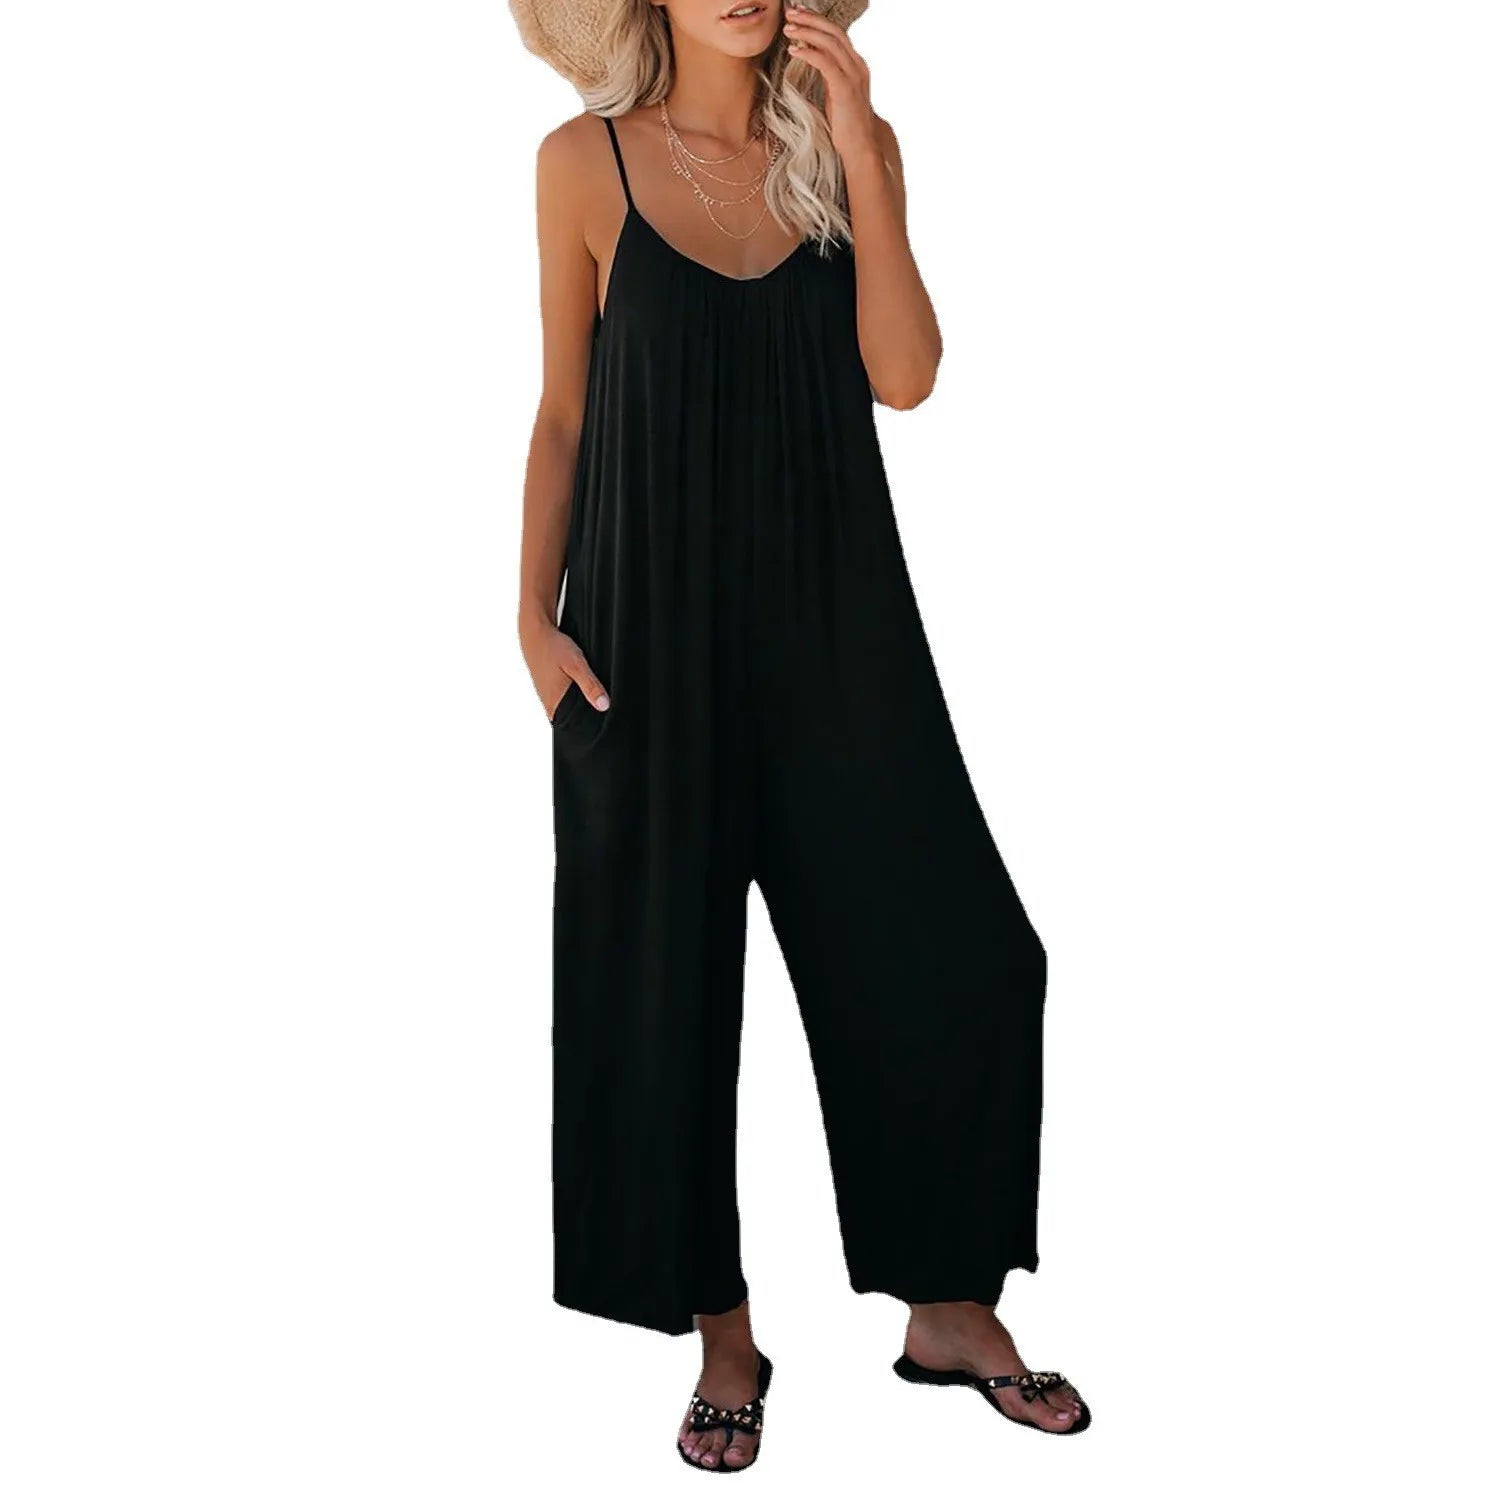 Womens Casual Sleeveless Strap Loose Adjustable Jumpsuits Stretchy Long Pants Romper with Pockets